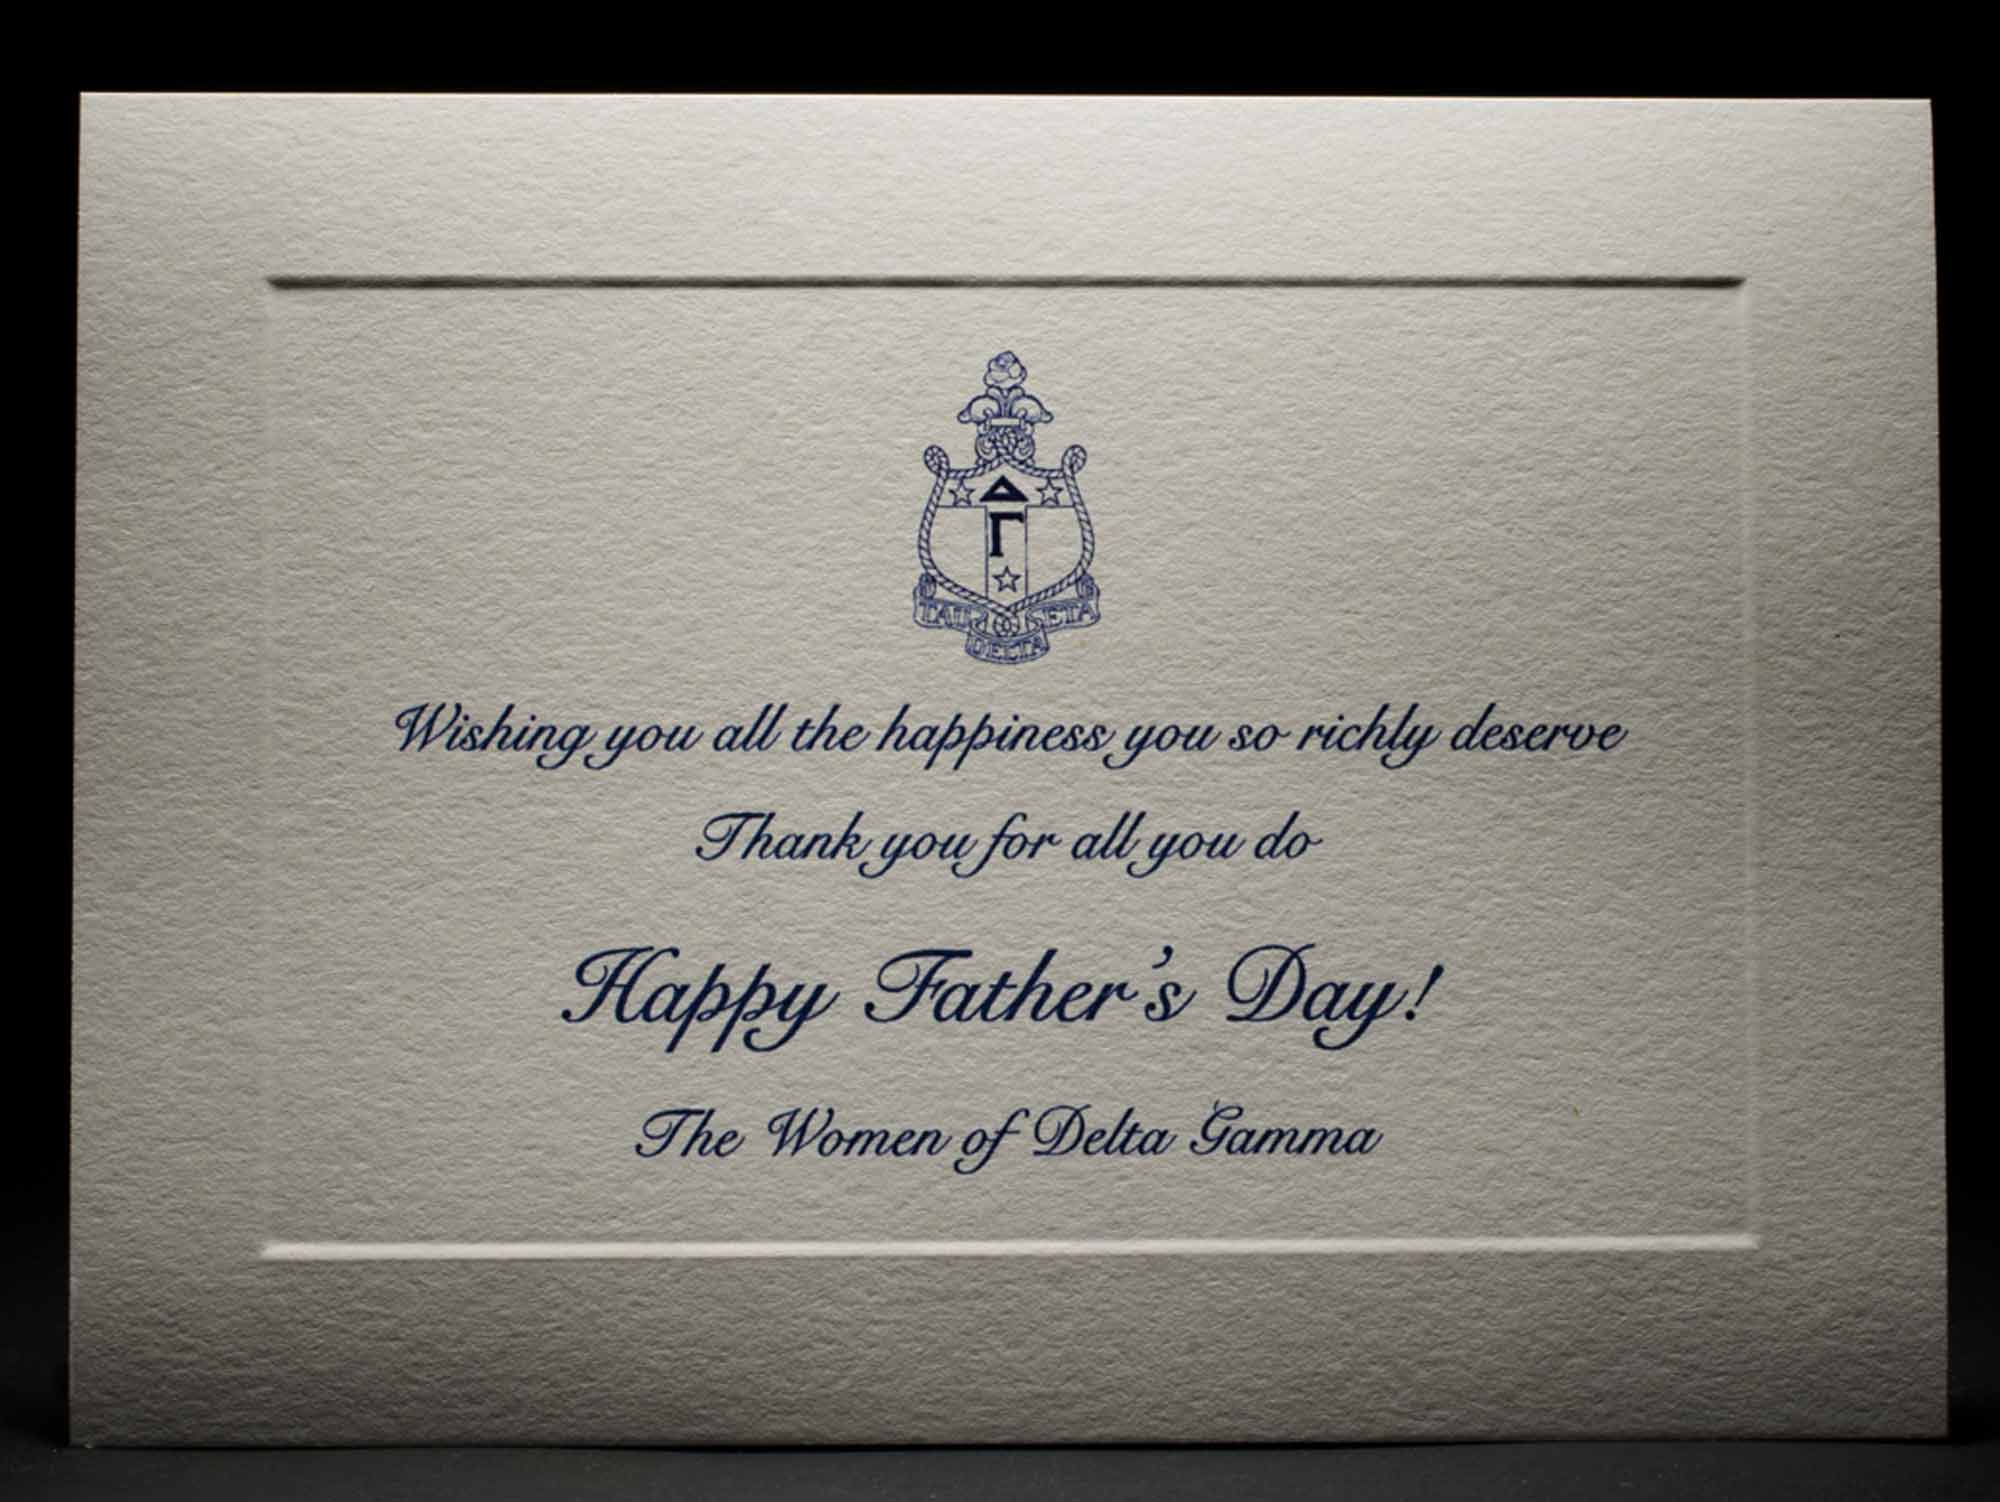 Father's Day Cards Delta Gamma